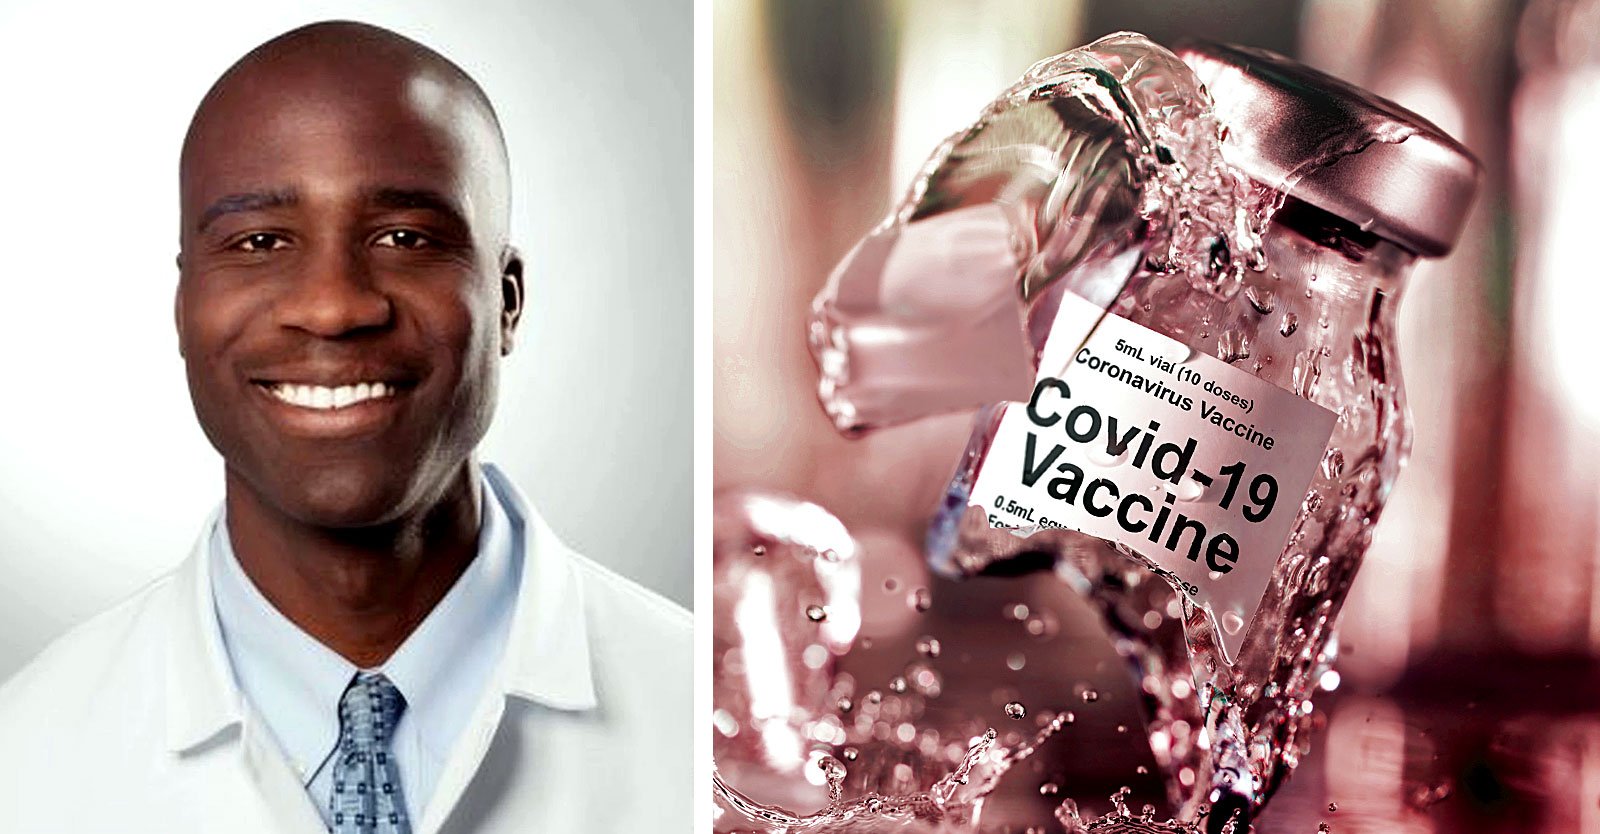 Florida Surgeon General Calls For Halt In Use Of COVID mRNA Vaccines